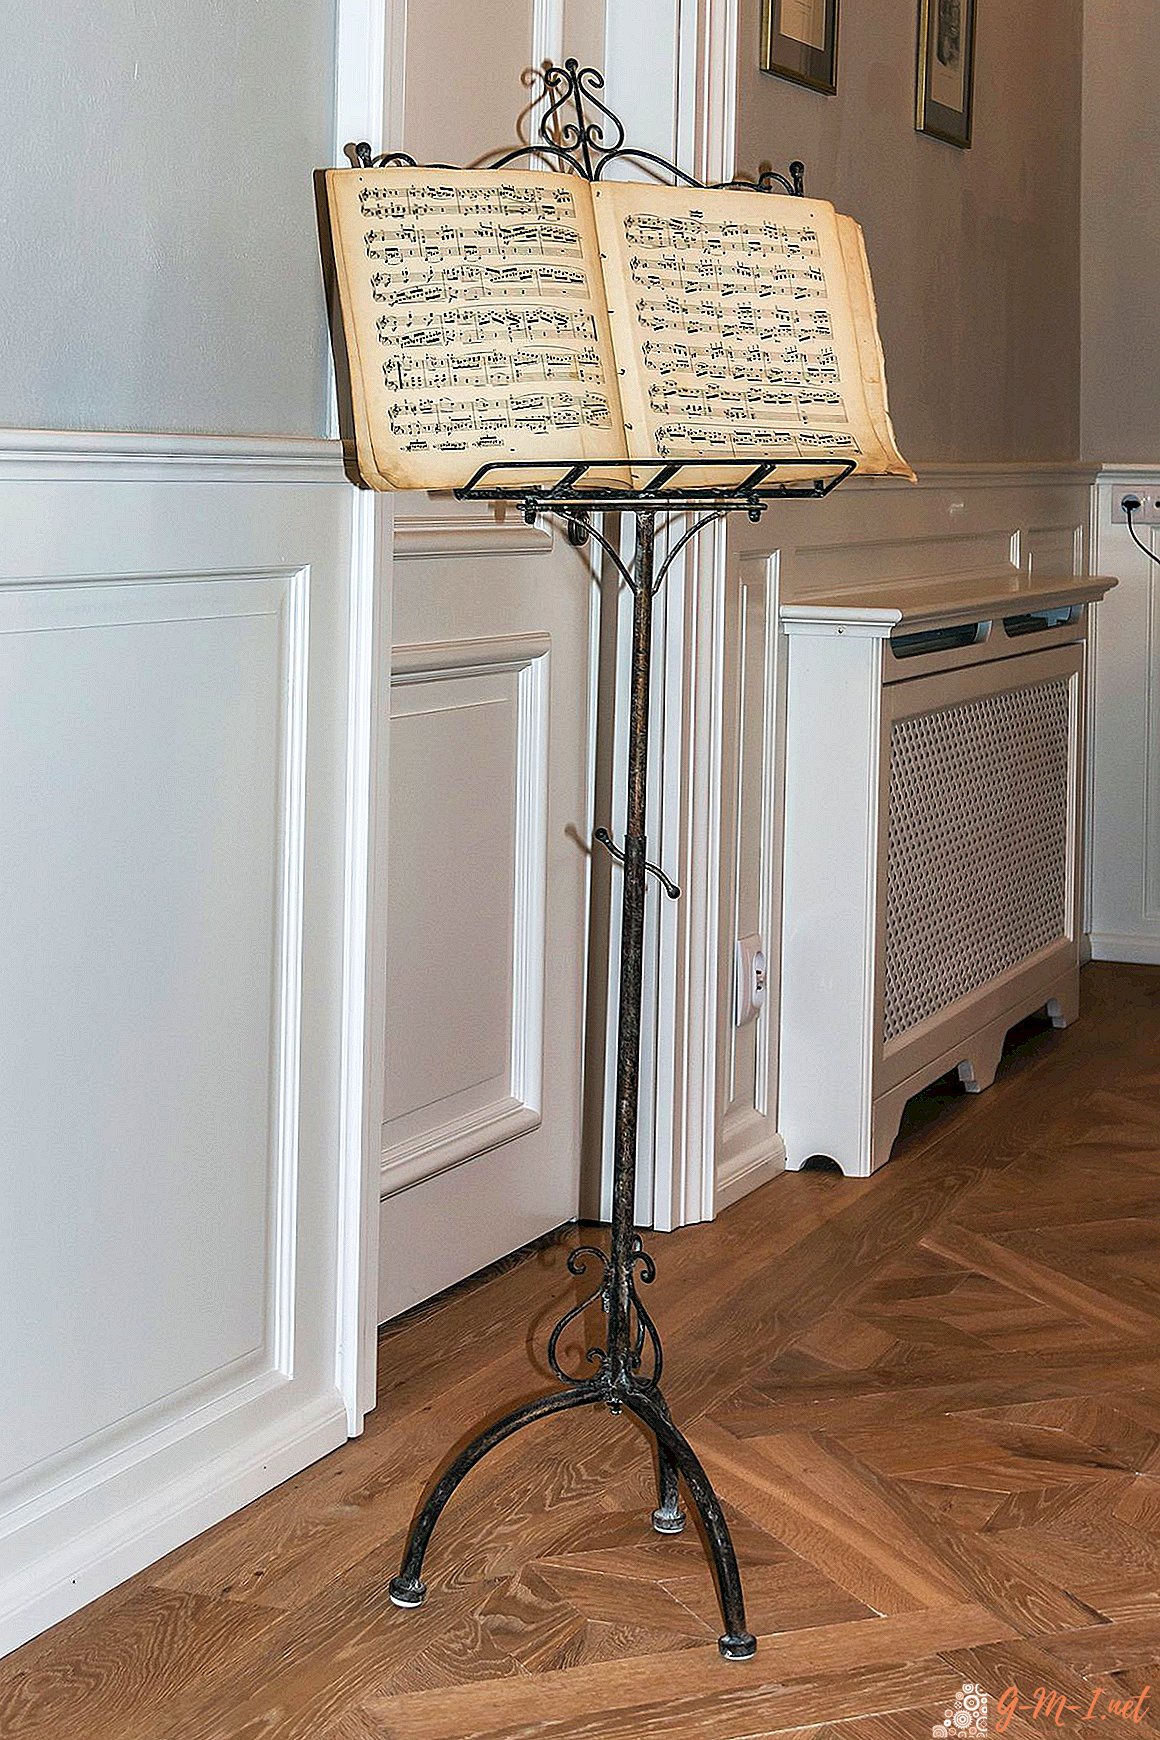 Music stand - what is it?